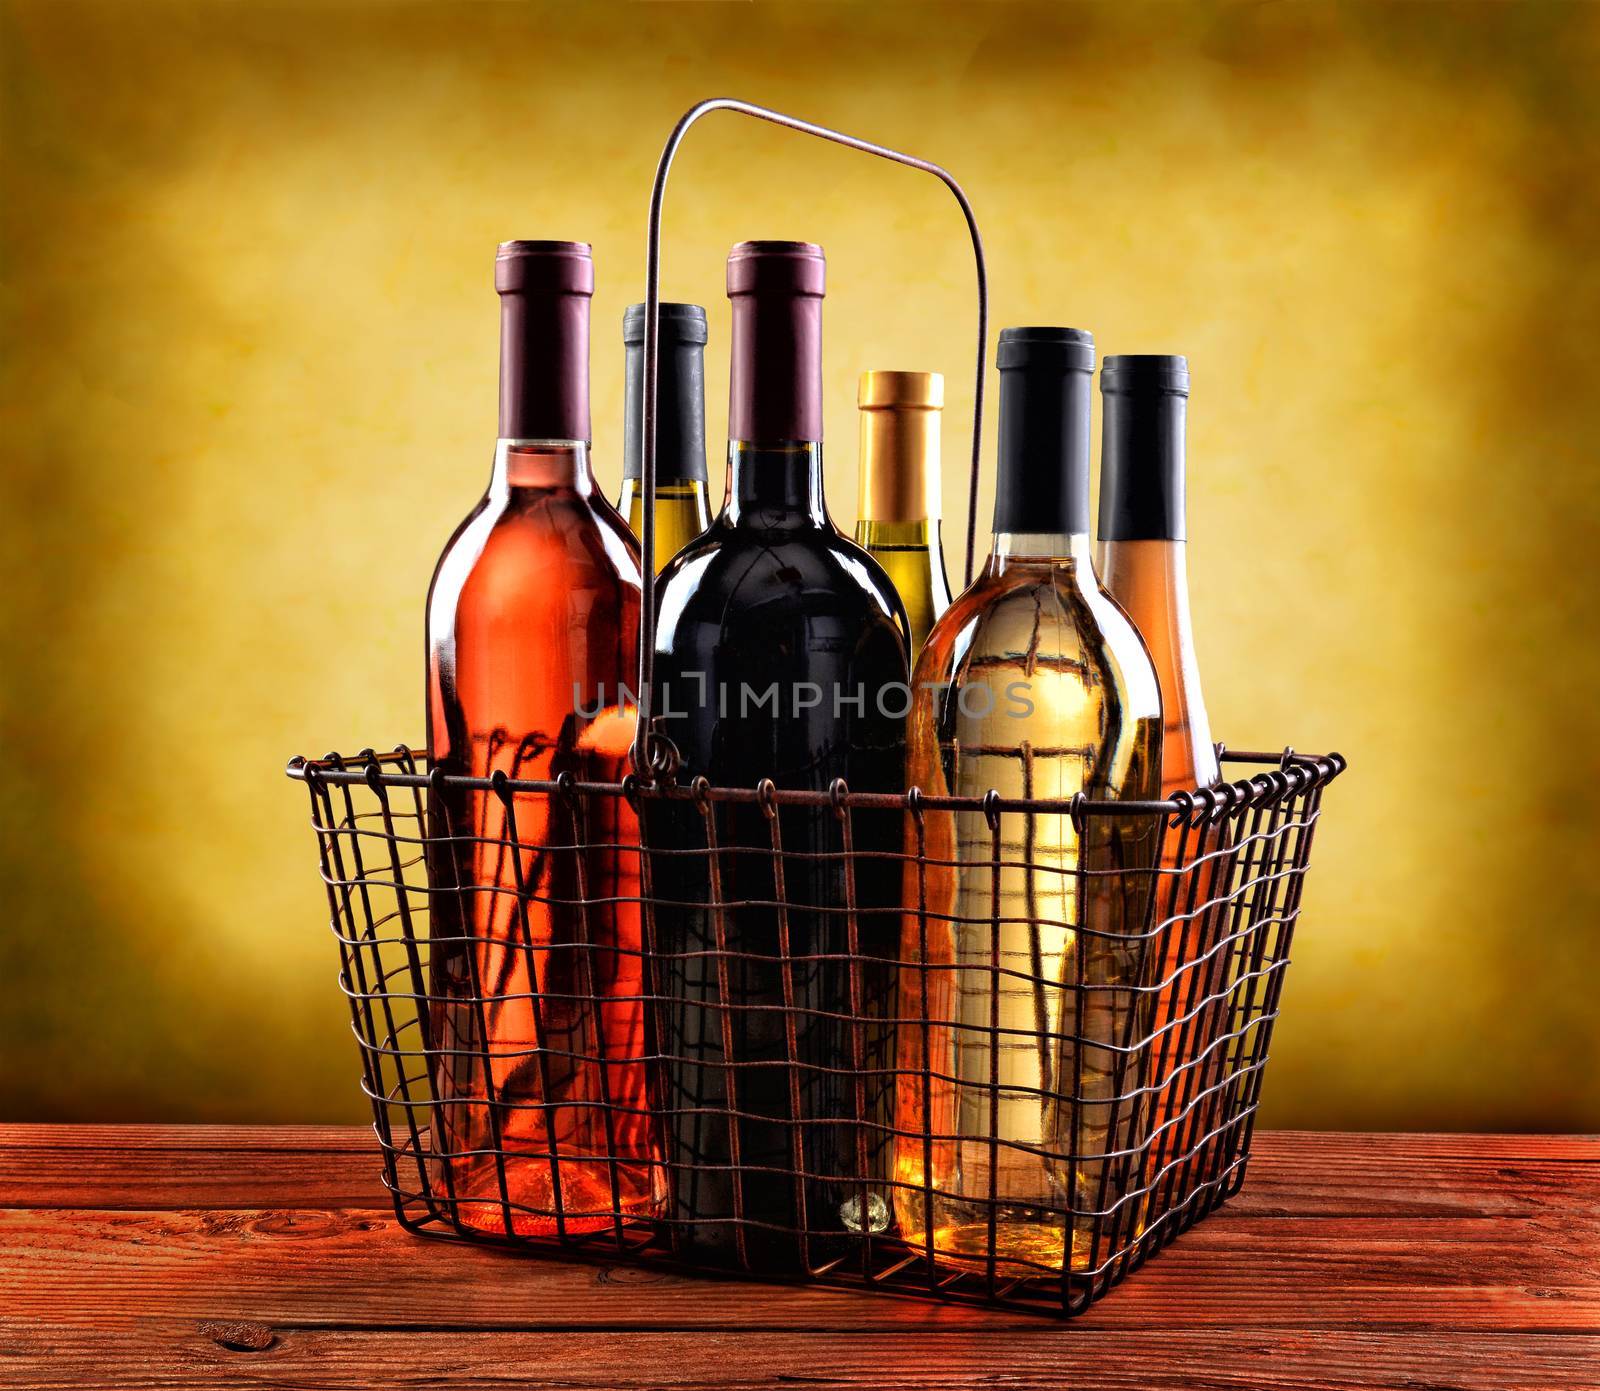 A wire shopping basket filled with wine bottles on a rustic wood table with a mottled background with warm tones.